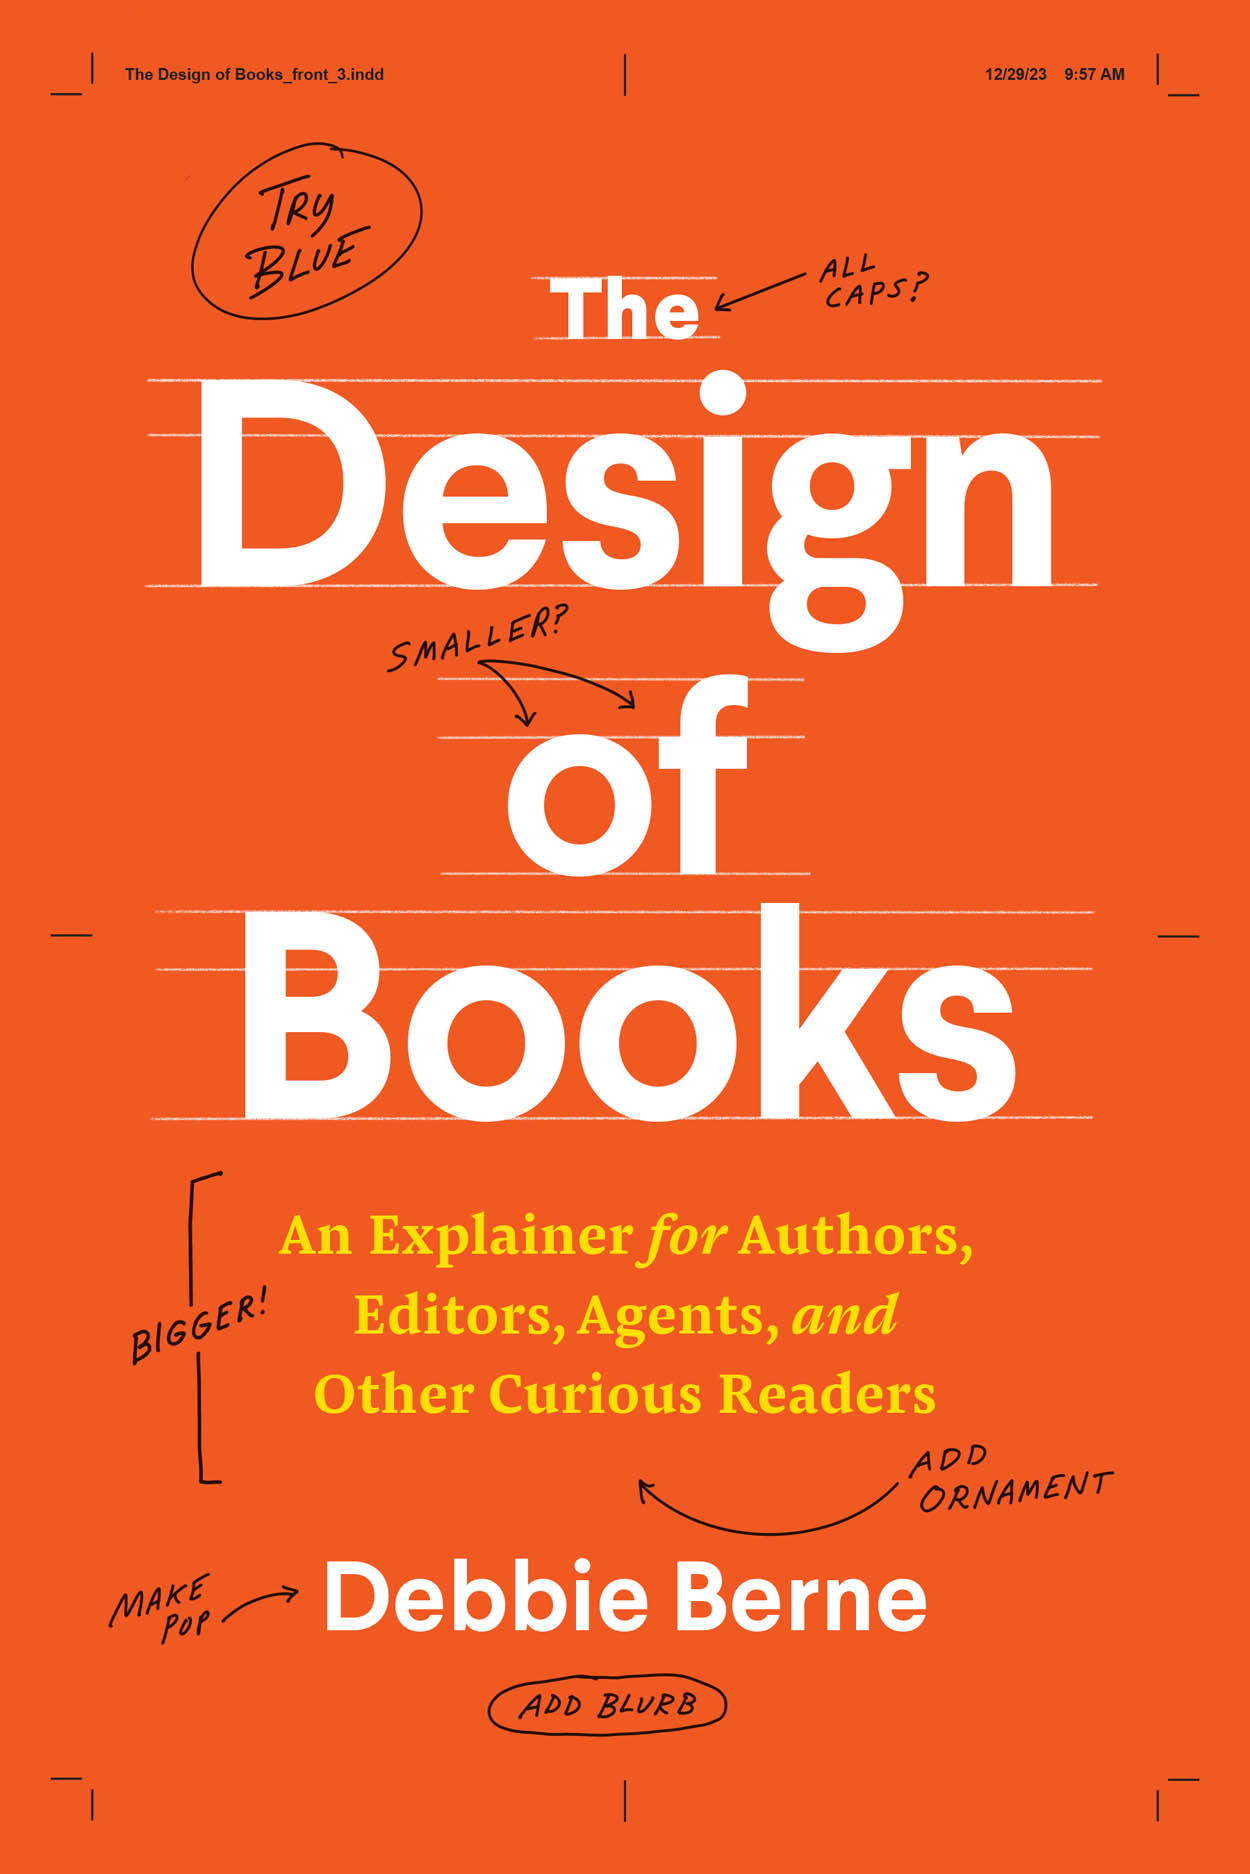 The Design of Books: An Explainer for Authors, Editors, Agents